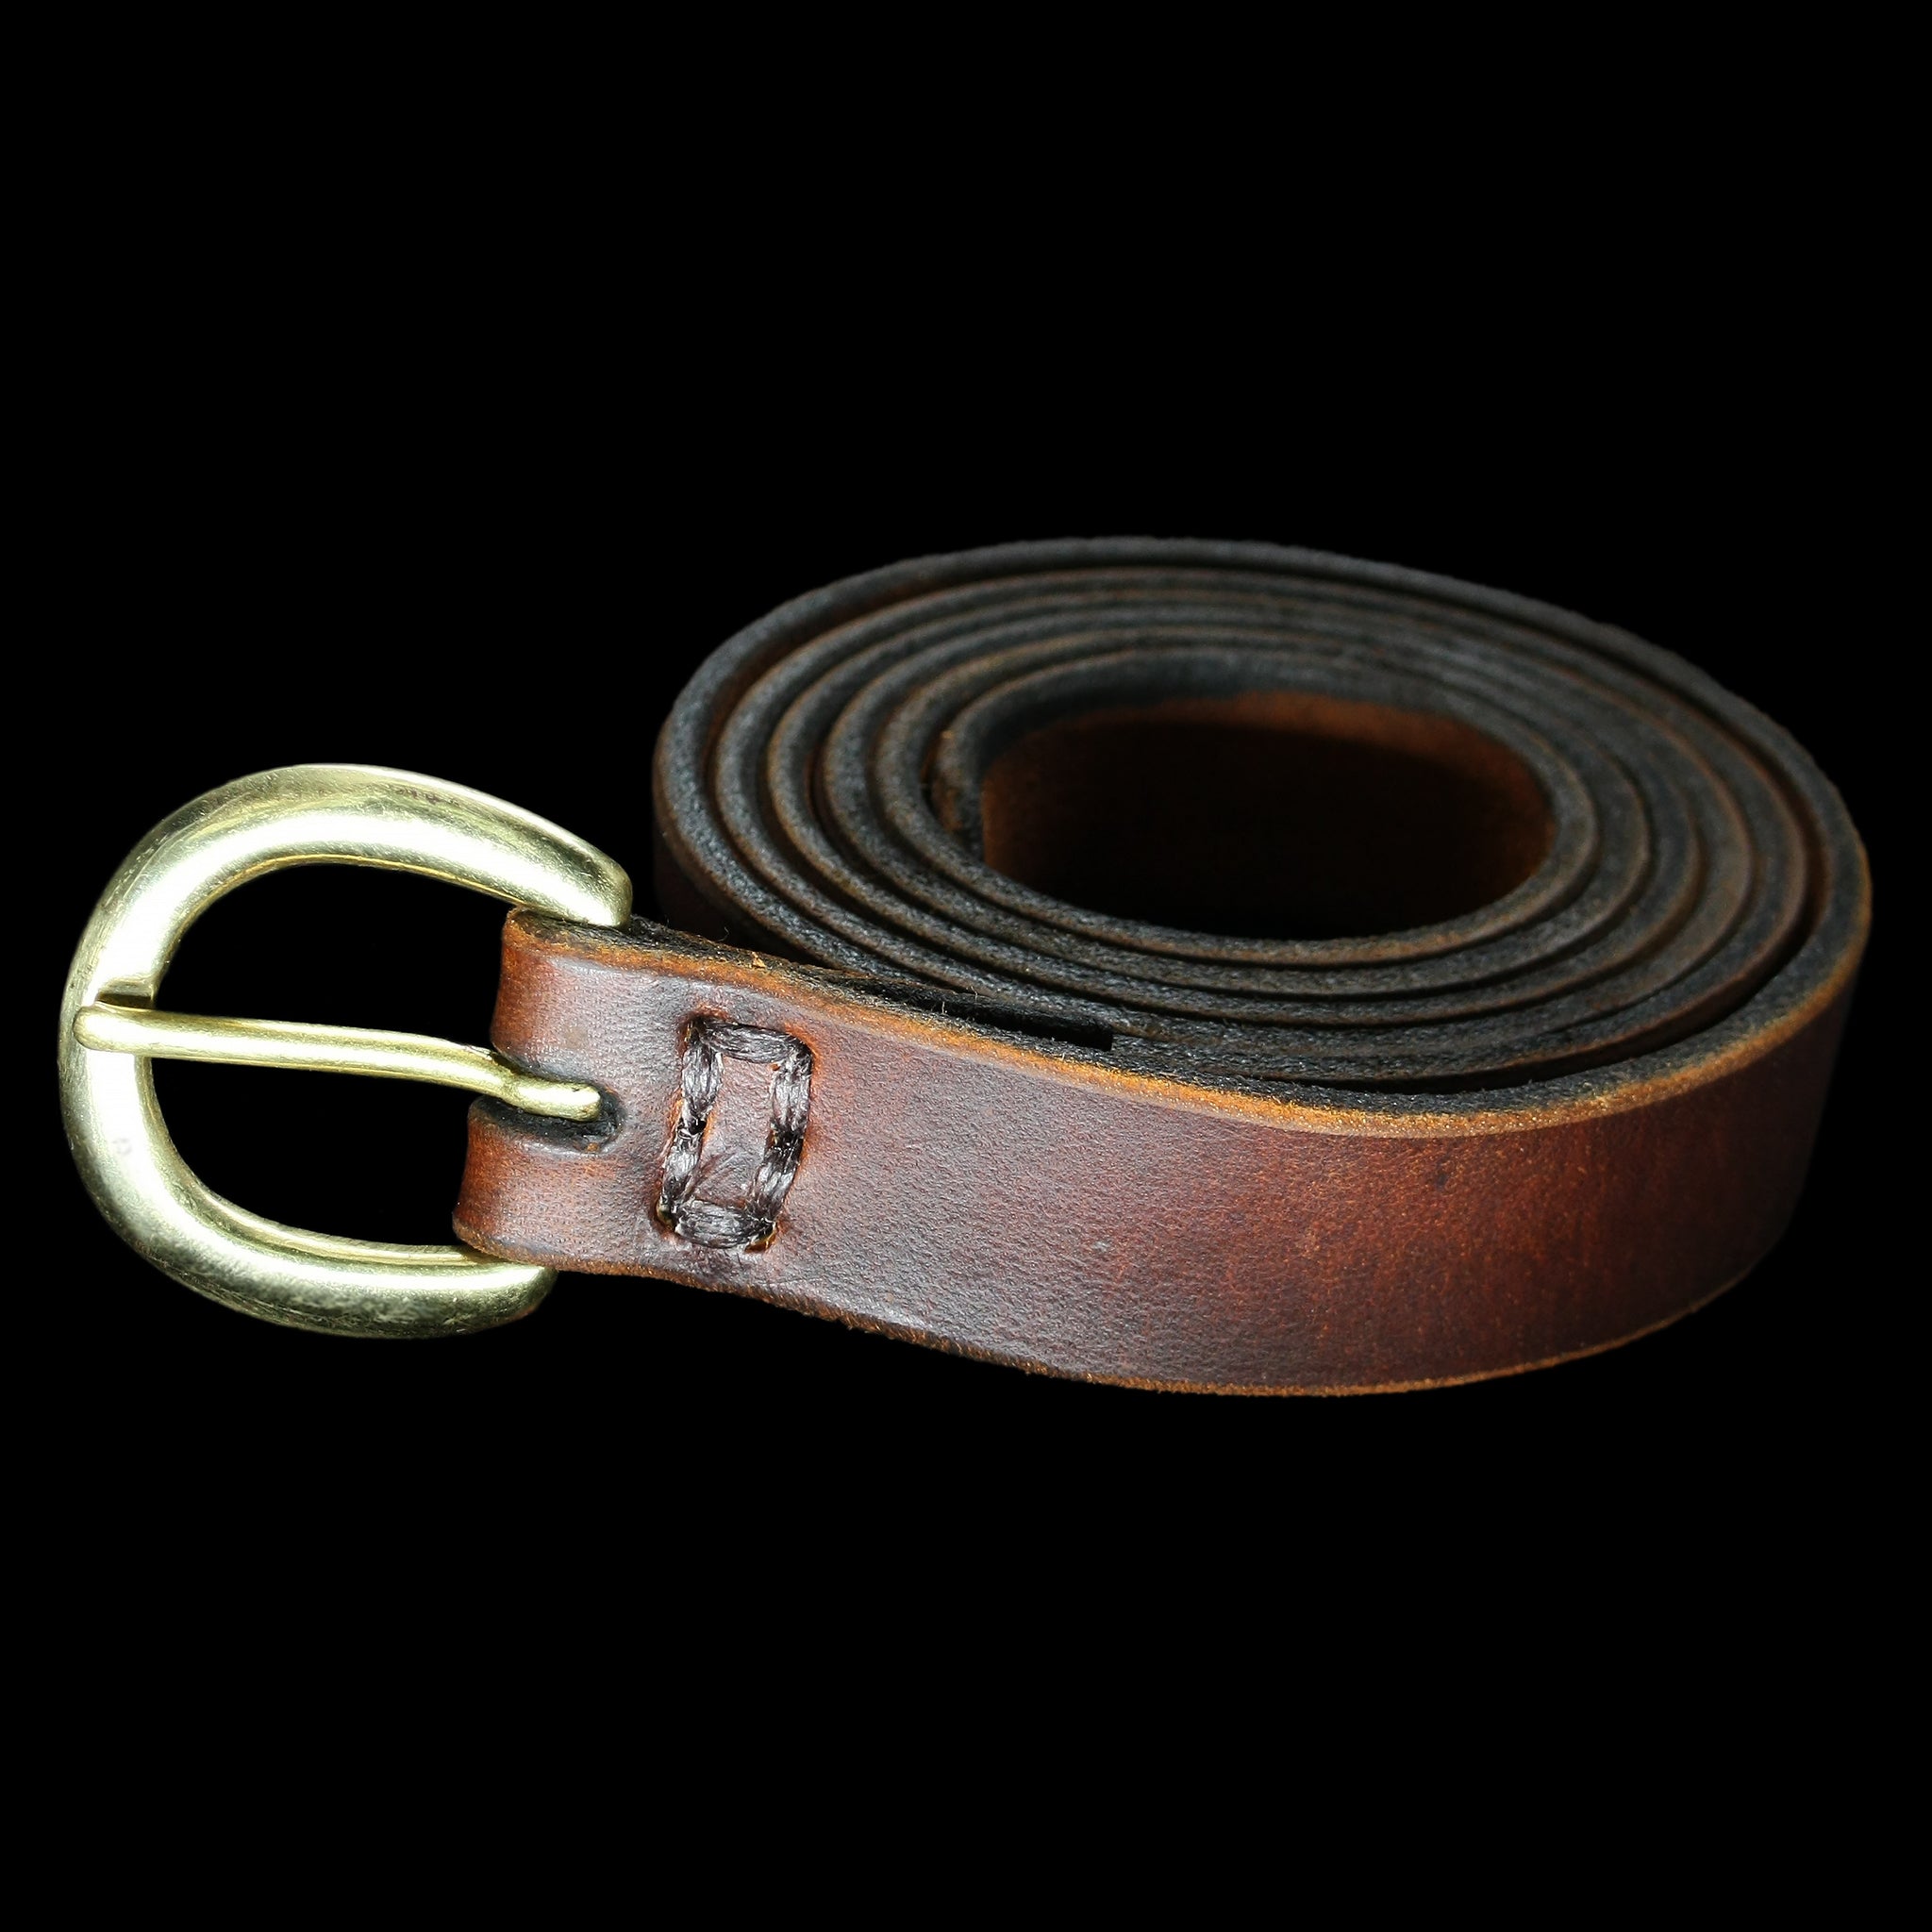 Leather Viking Belt with Brass Buckle - 1 Inch Width